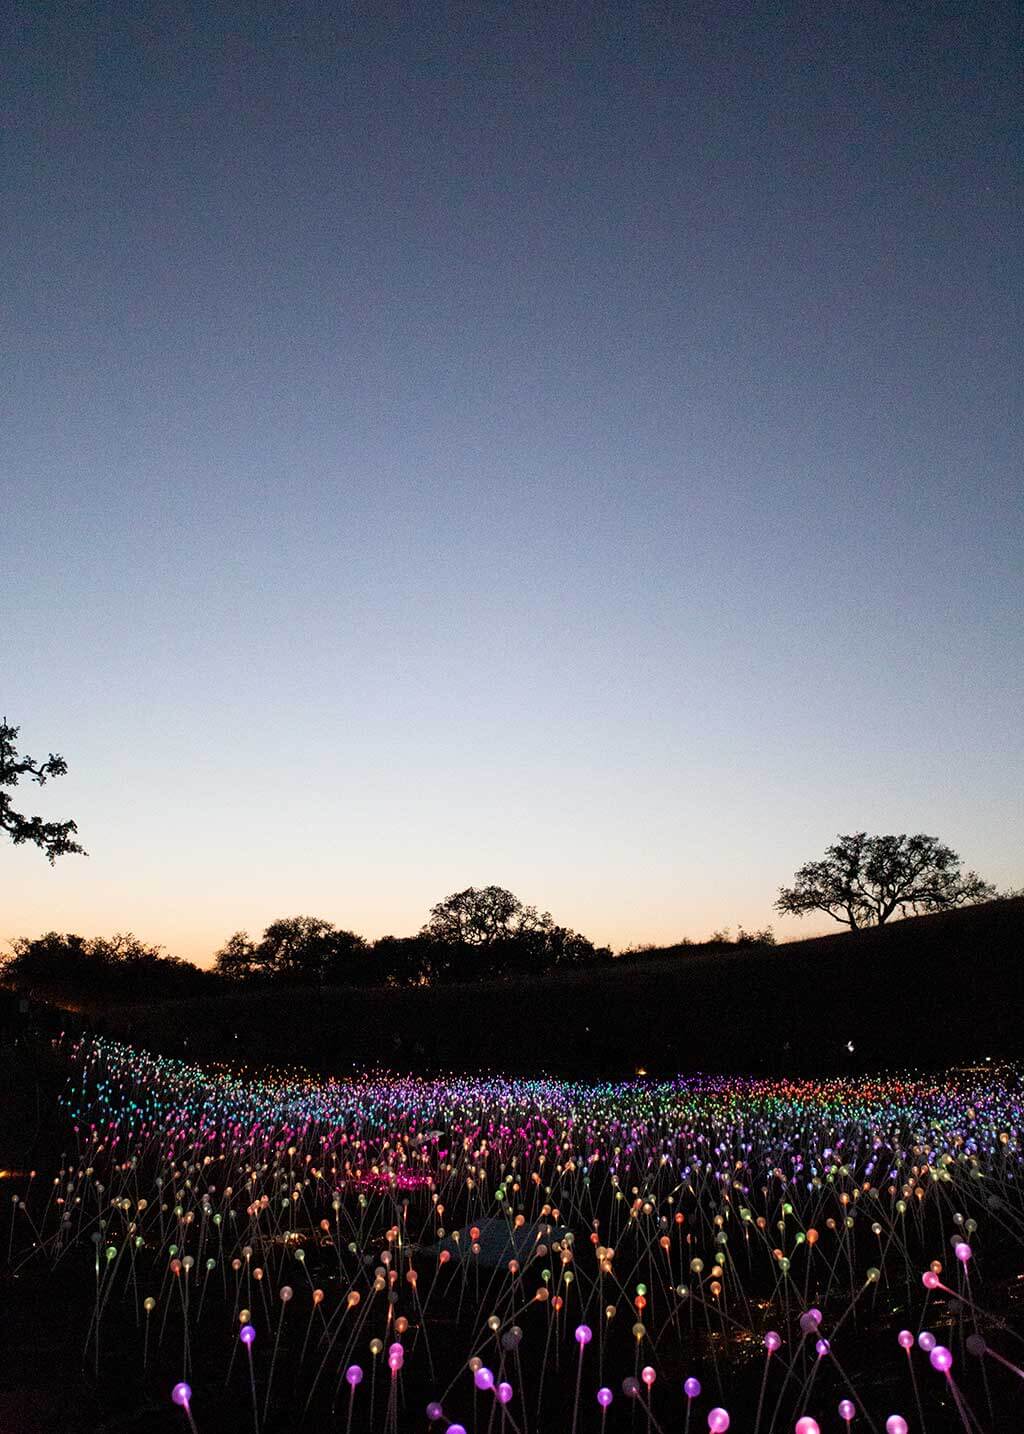 drive-swim-fly-paso-robles-california-sensorio-experience-bruce-munro-led-lights-art-installation-gallery-nature-field-of-light-6